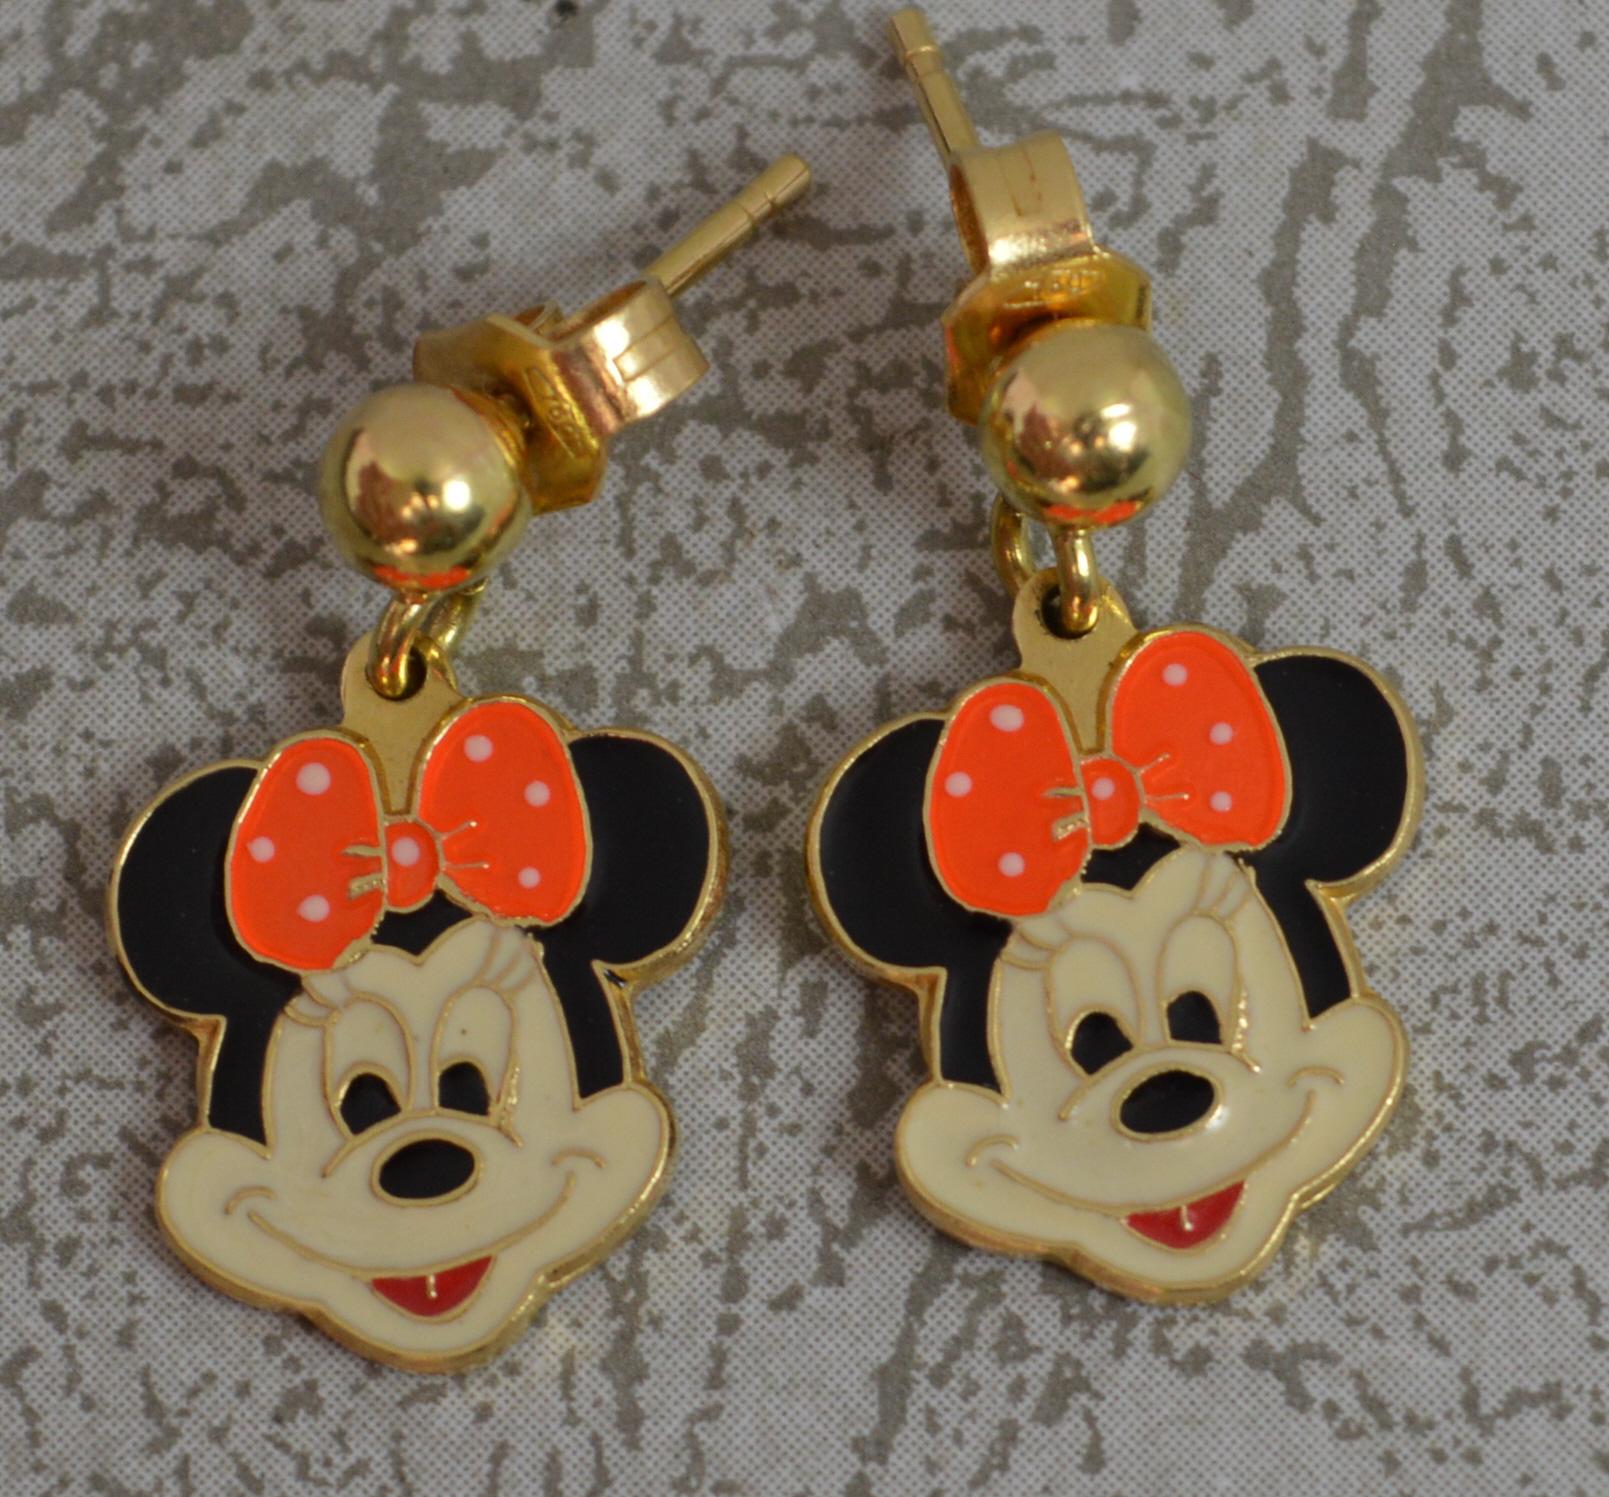 A superb pair of 18ct gold earrings.
Designed as a Minnie Mouse with an enamelled face.
12mm x 13mm head.
CONDITION ; Very good. Crisp design. Issue free. Clean enamelling. Well fitted backs. Please view photographs.
WEIGHT ; 4.2 grams
HALLMARKS ;